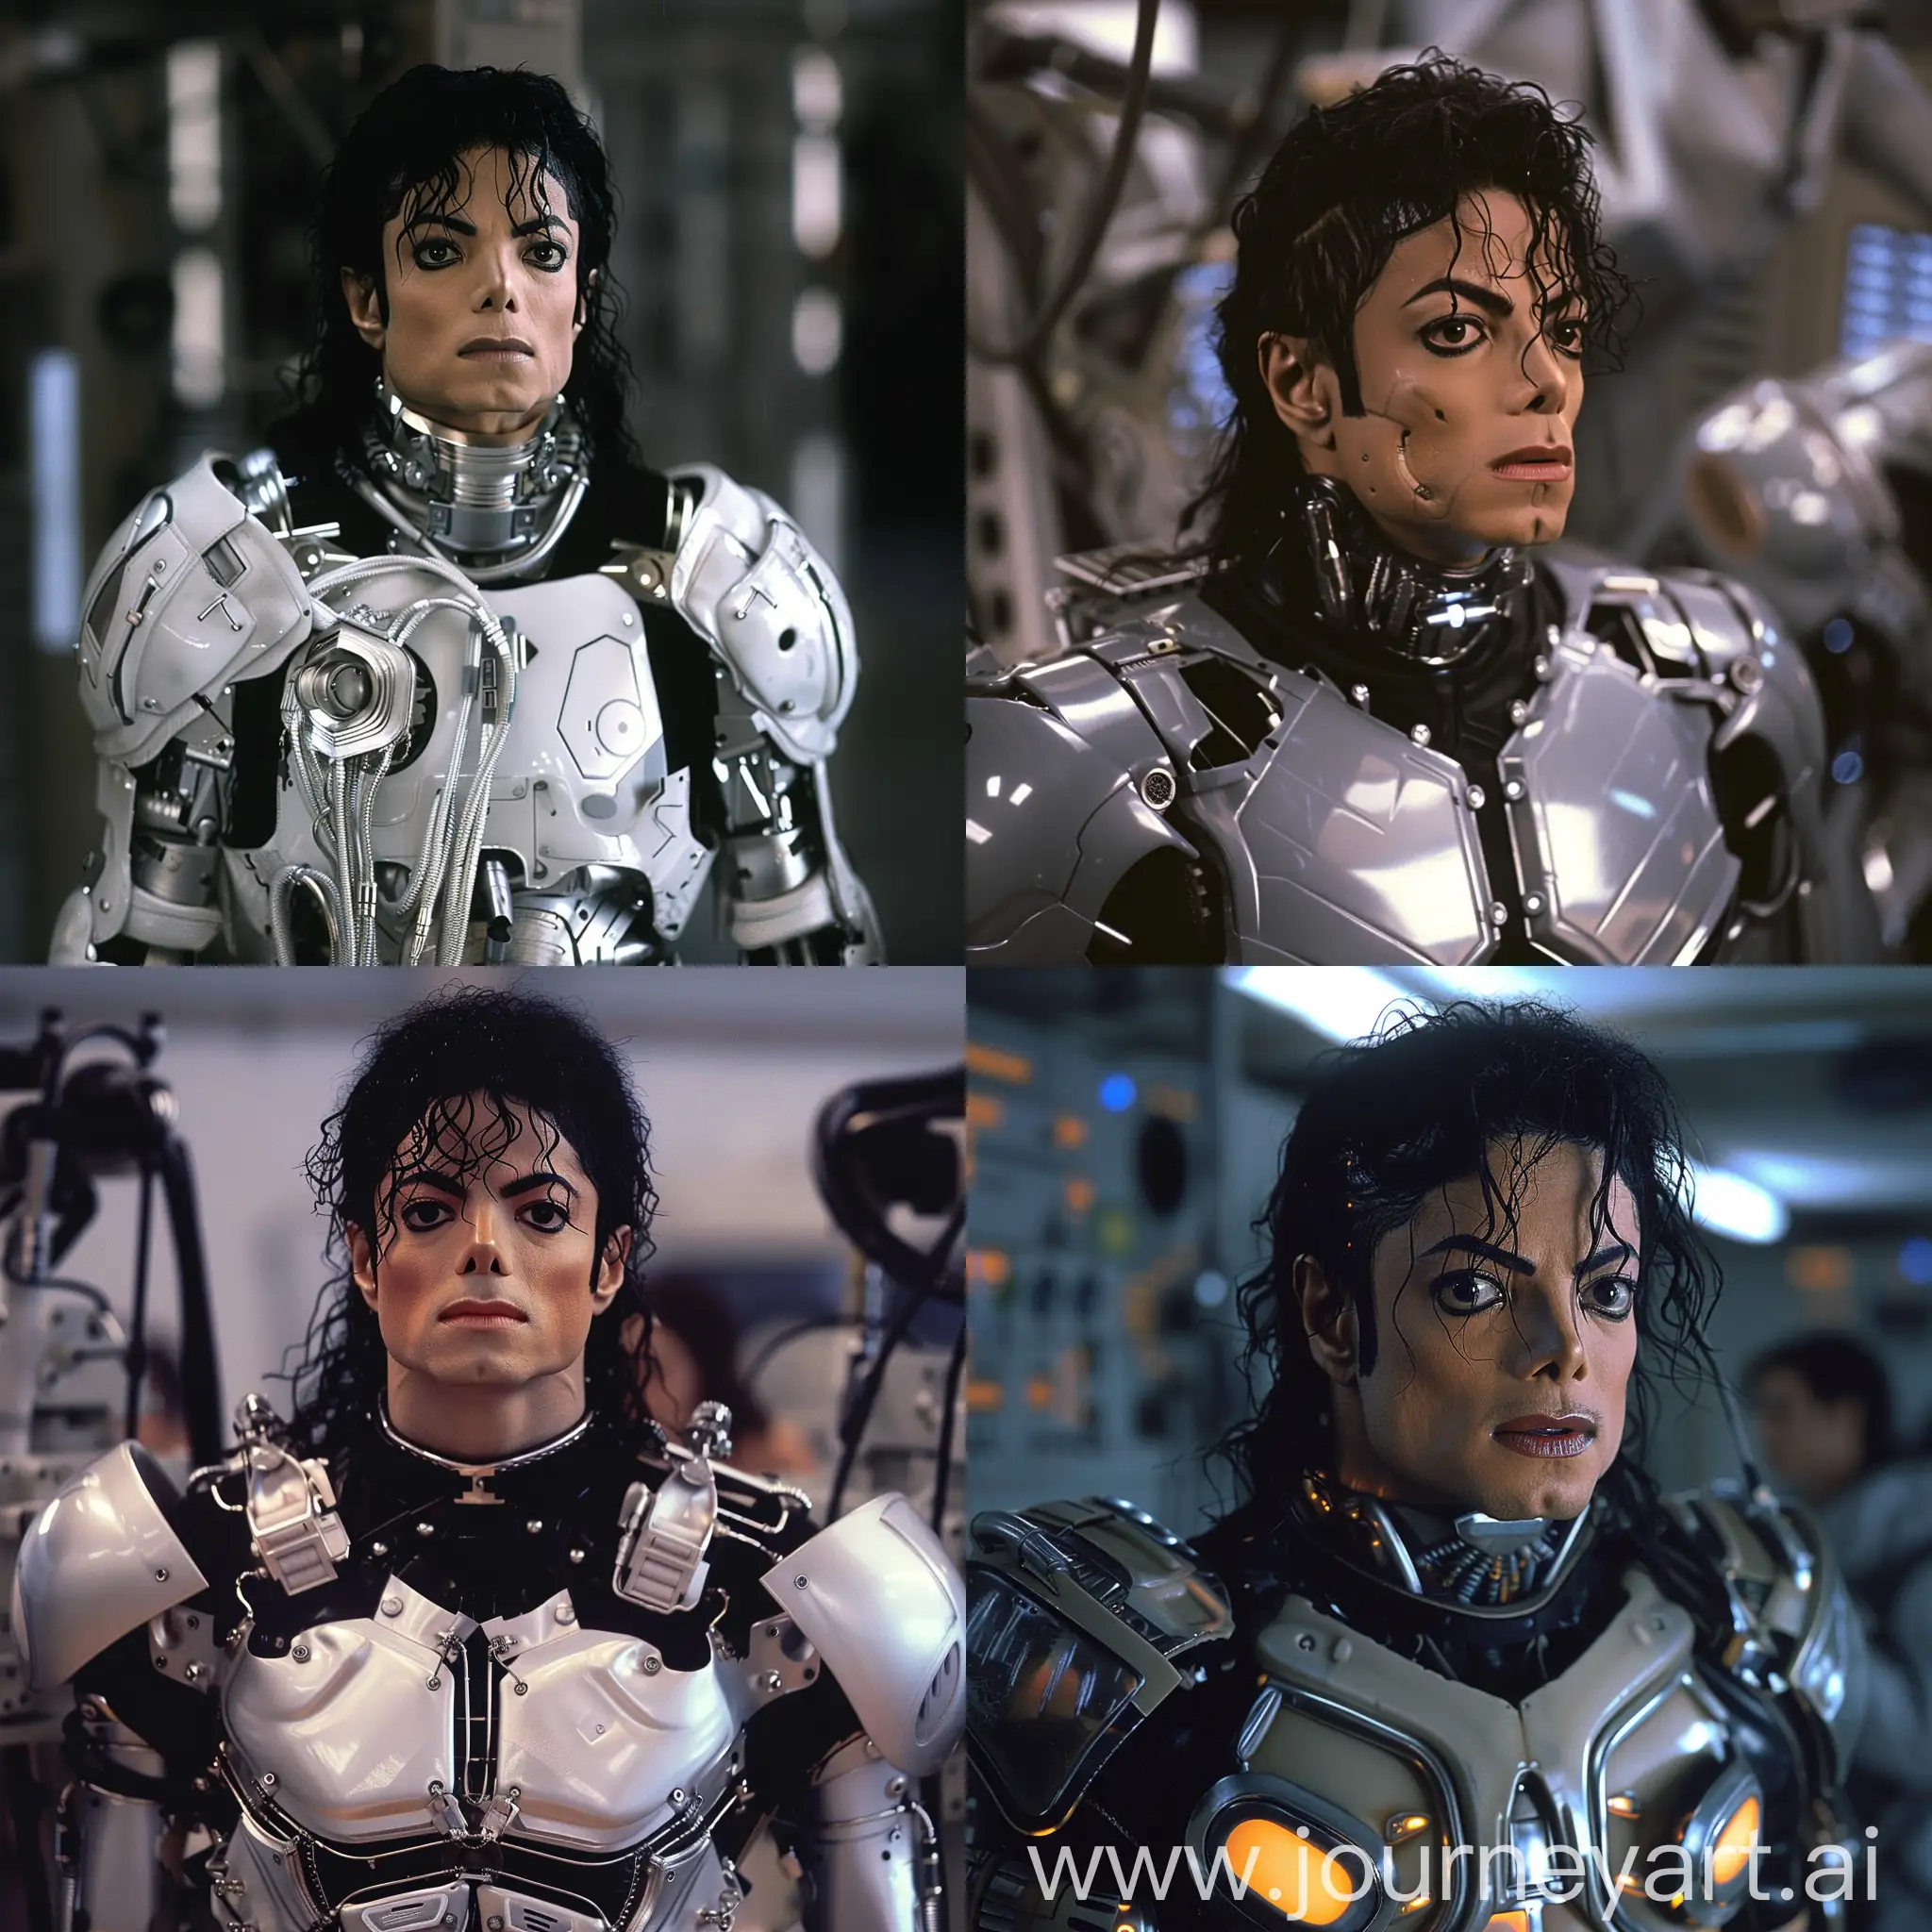 Michael Jackson in cybernetic suit, realistic style.